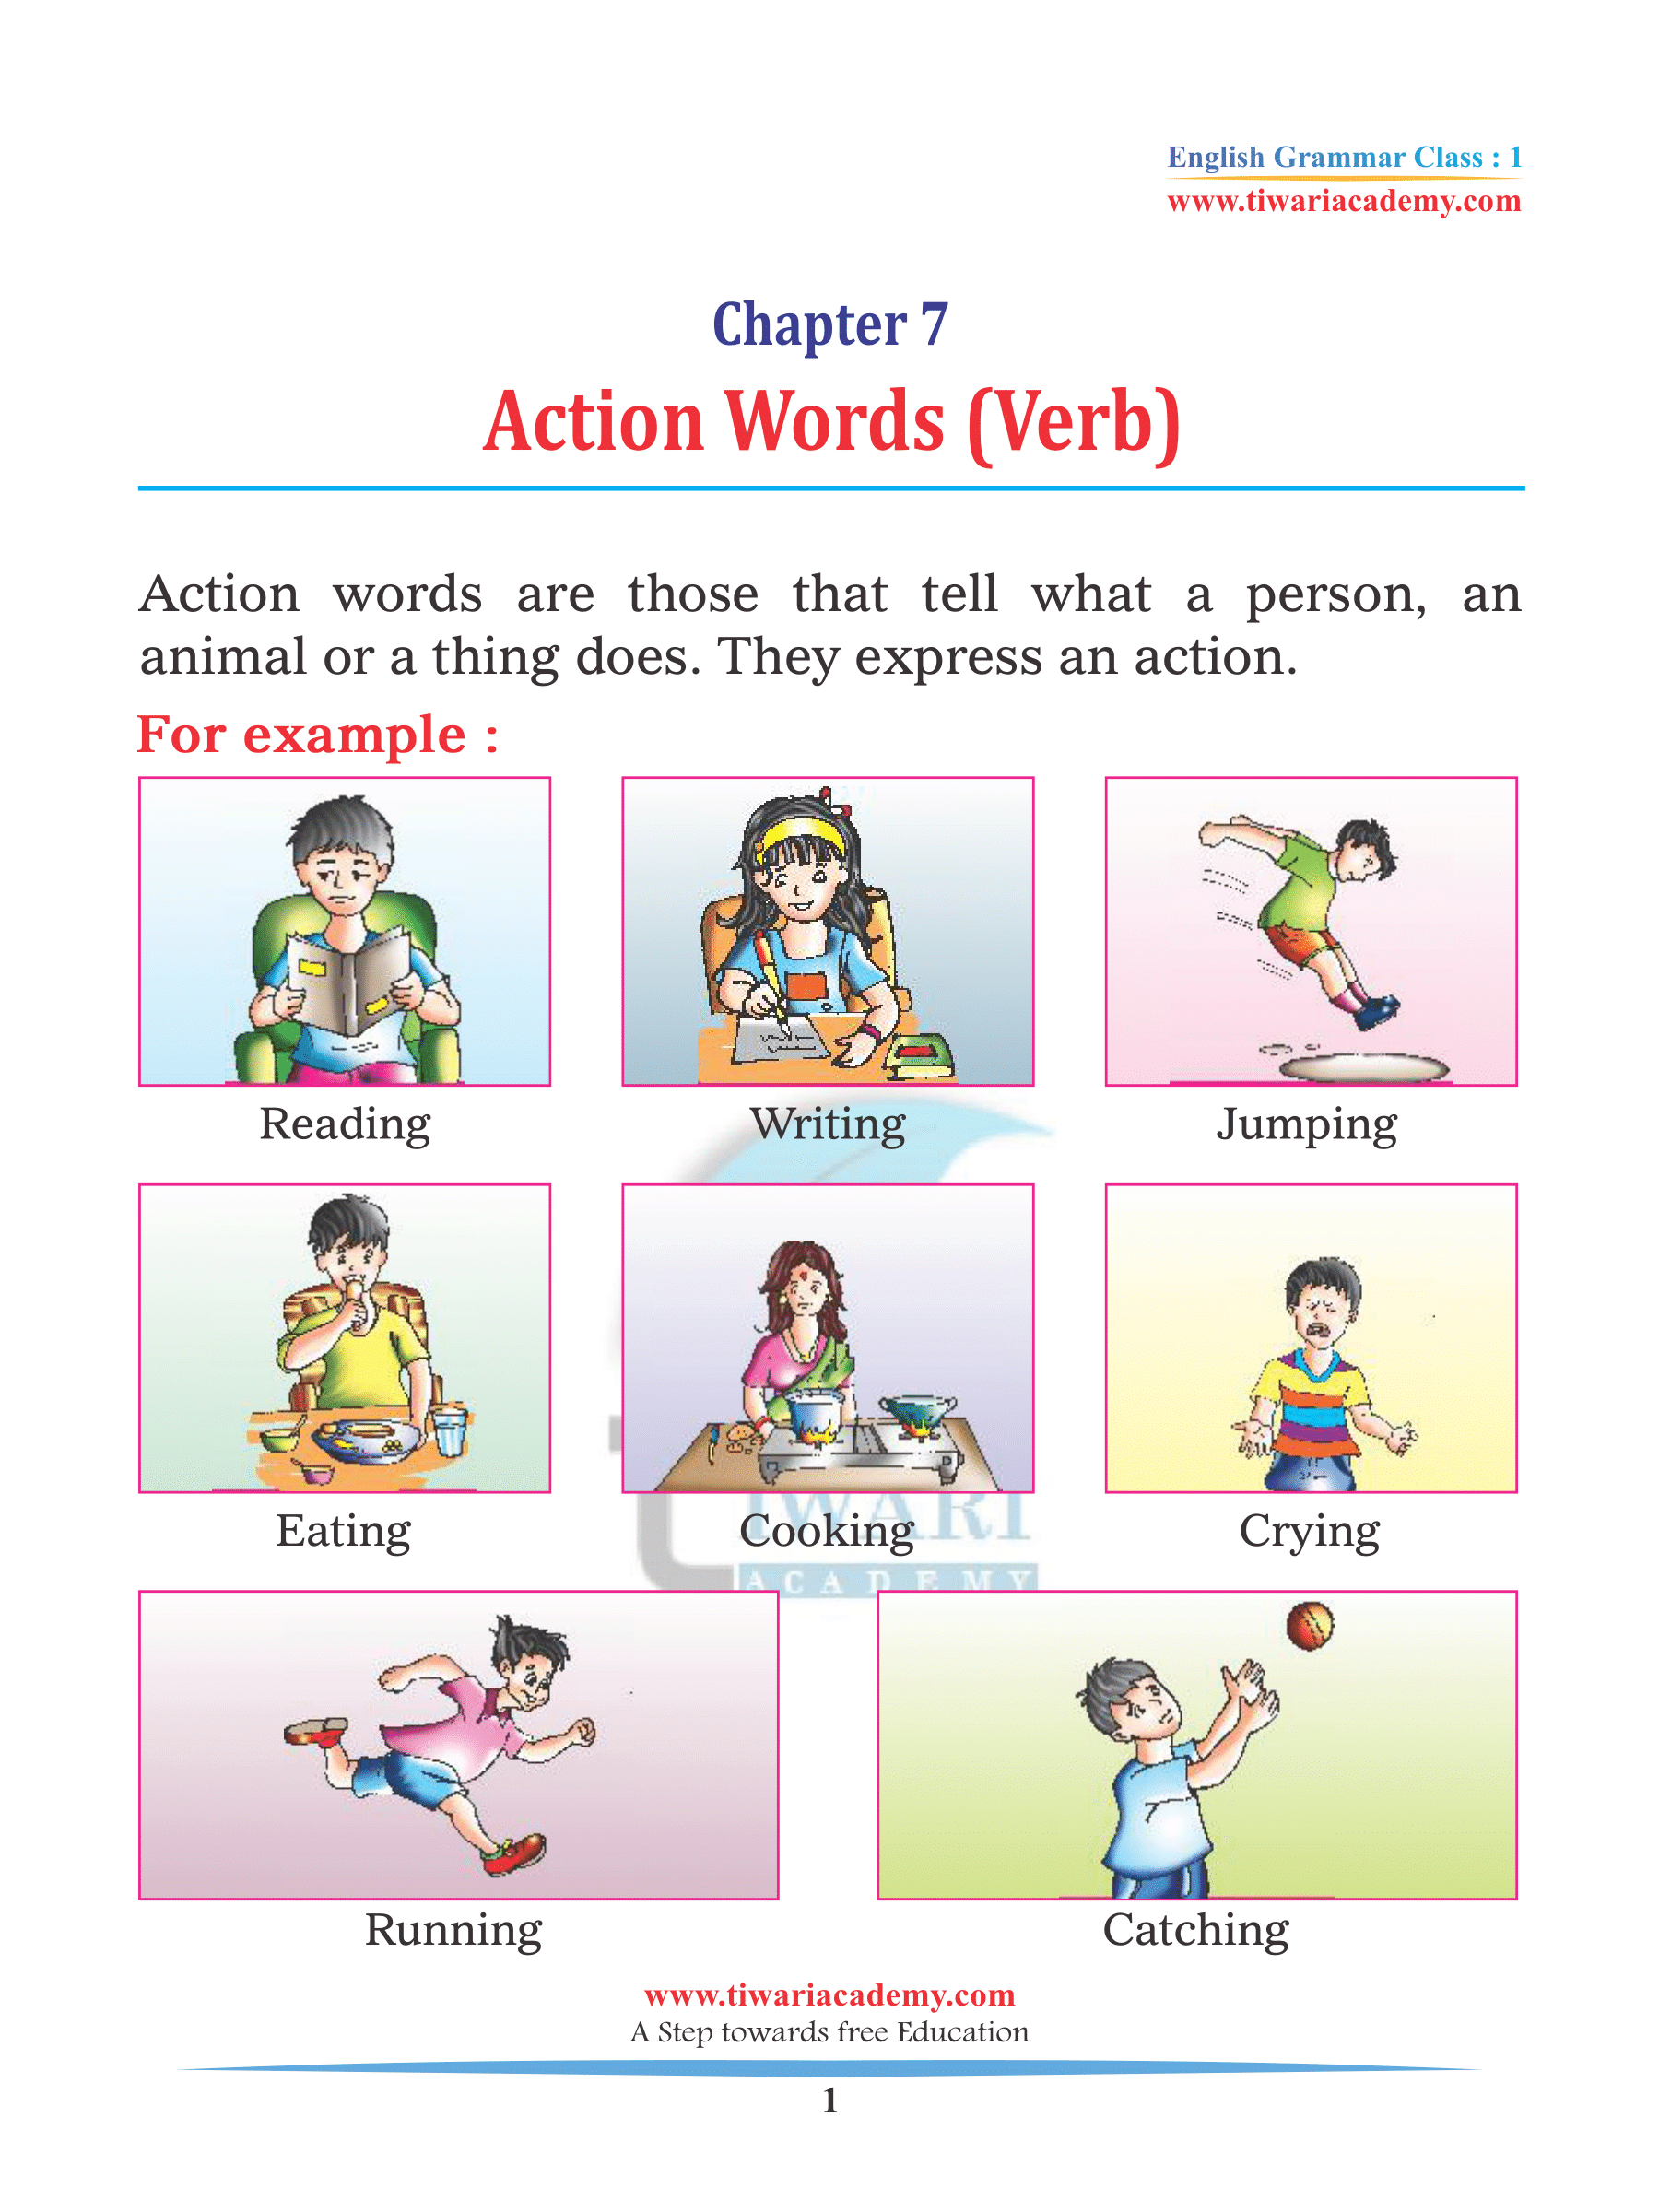 Verb or Action Words for grade 1